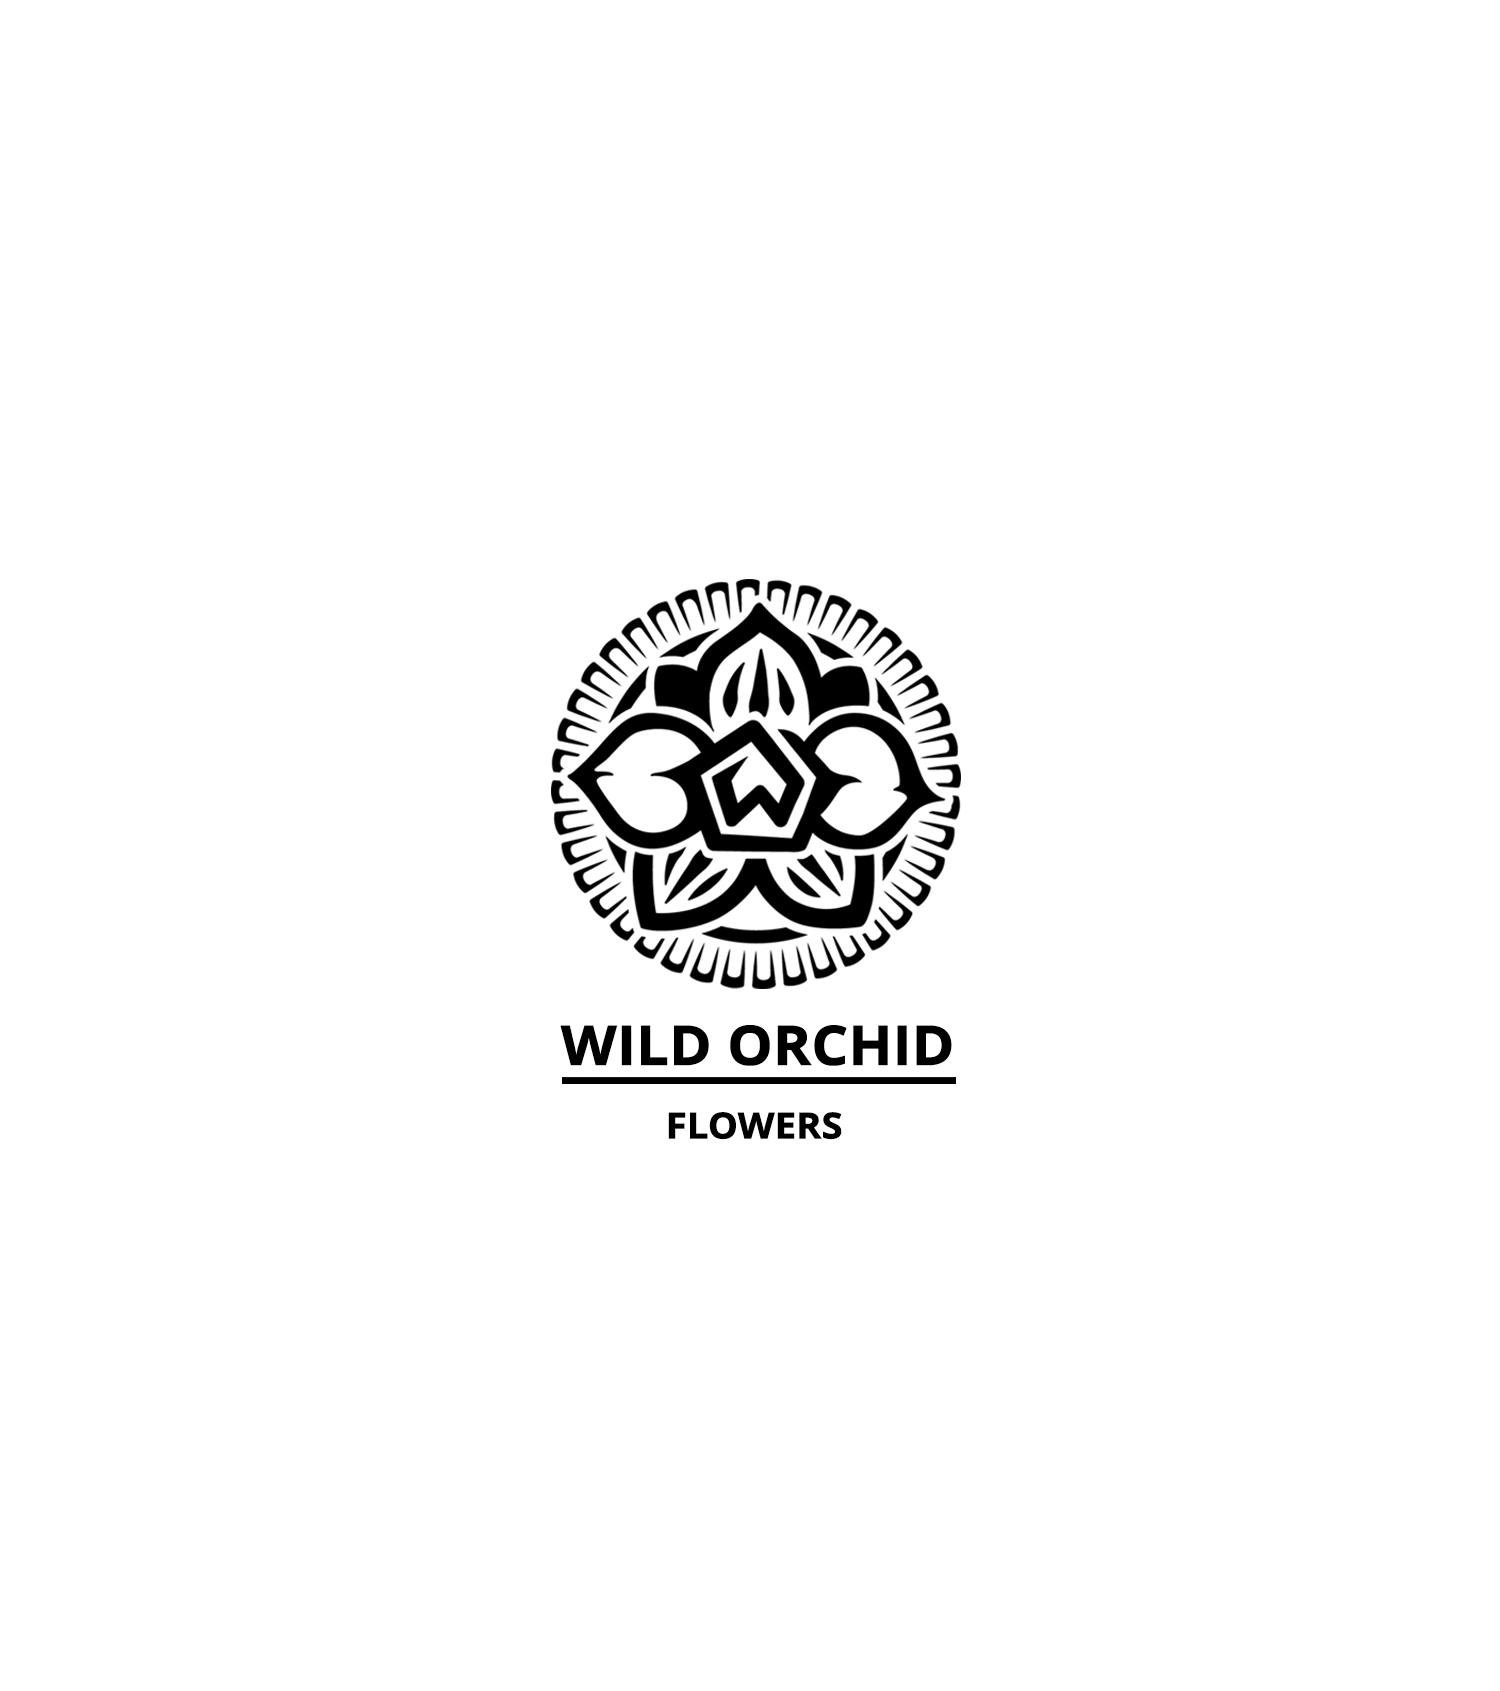 Orchid Flower Logo - Wild Orchid Flowers